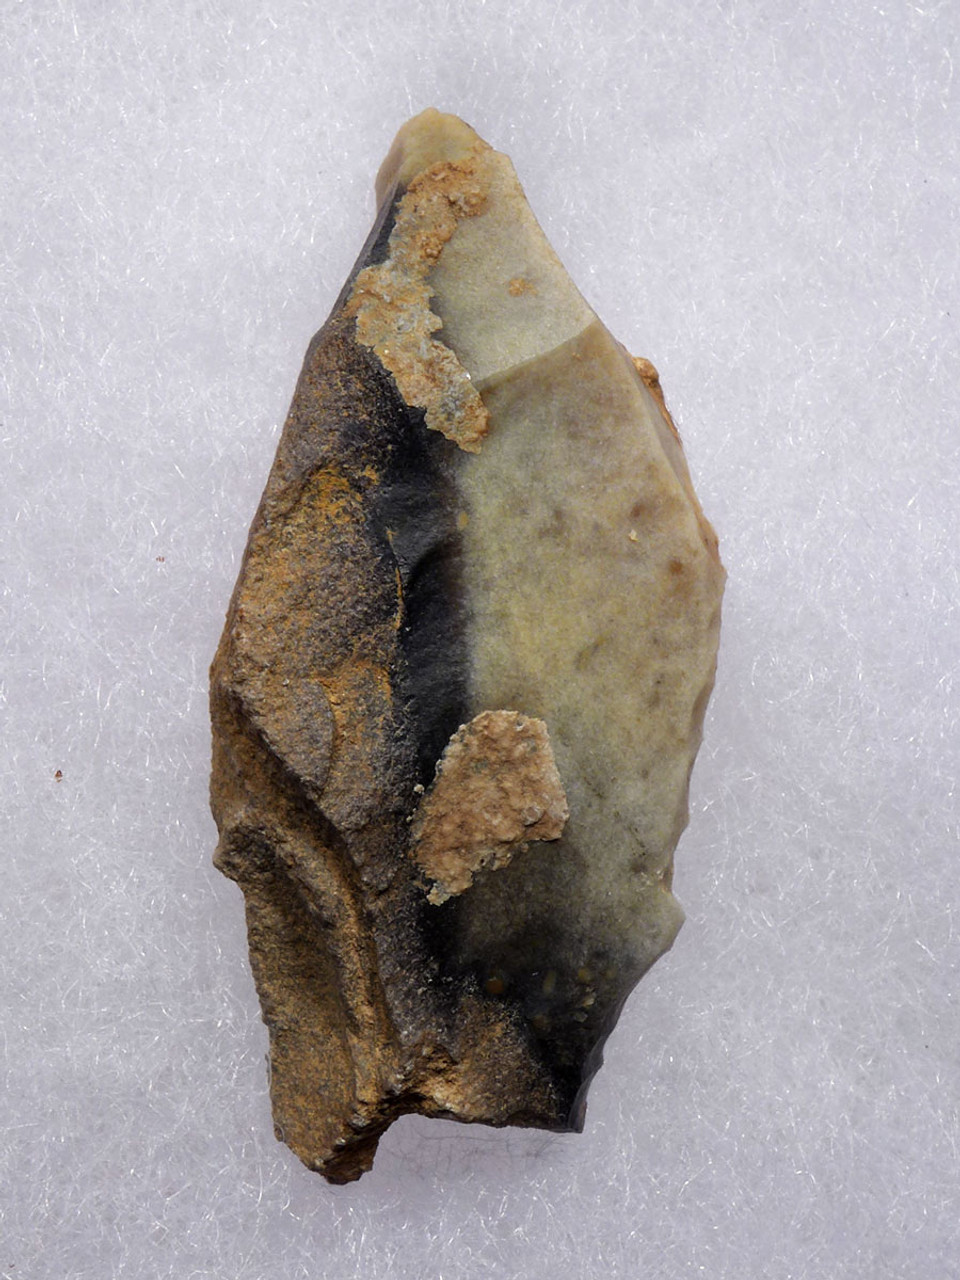 CRO-MAGNON ART-MAKING BURIN TOOL FROM THE UPPER PALEOLITHIC MAGDALENIAN FROM FAMOUS PLACARD CAVE ART SITE IN FRANCE  *UP055